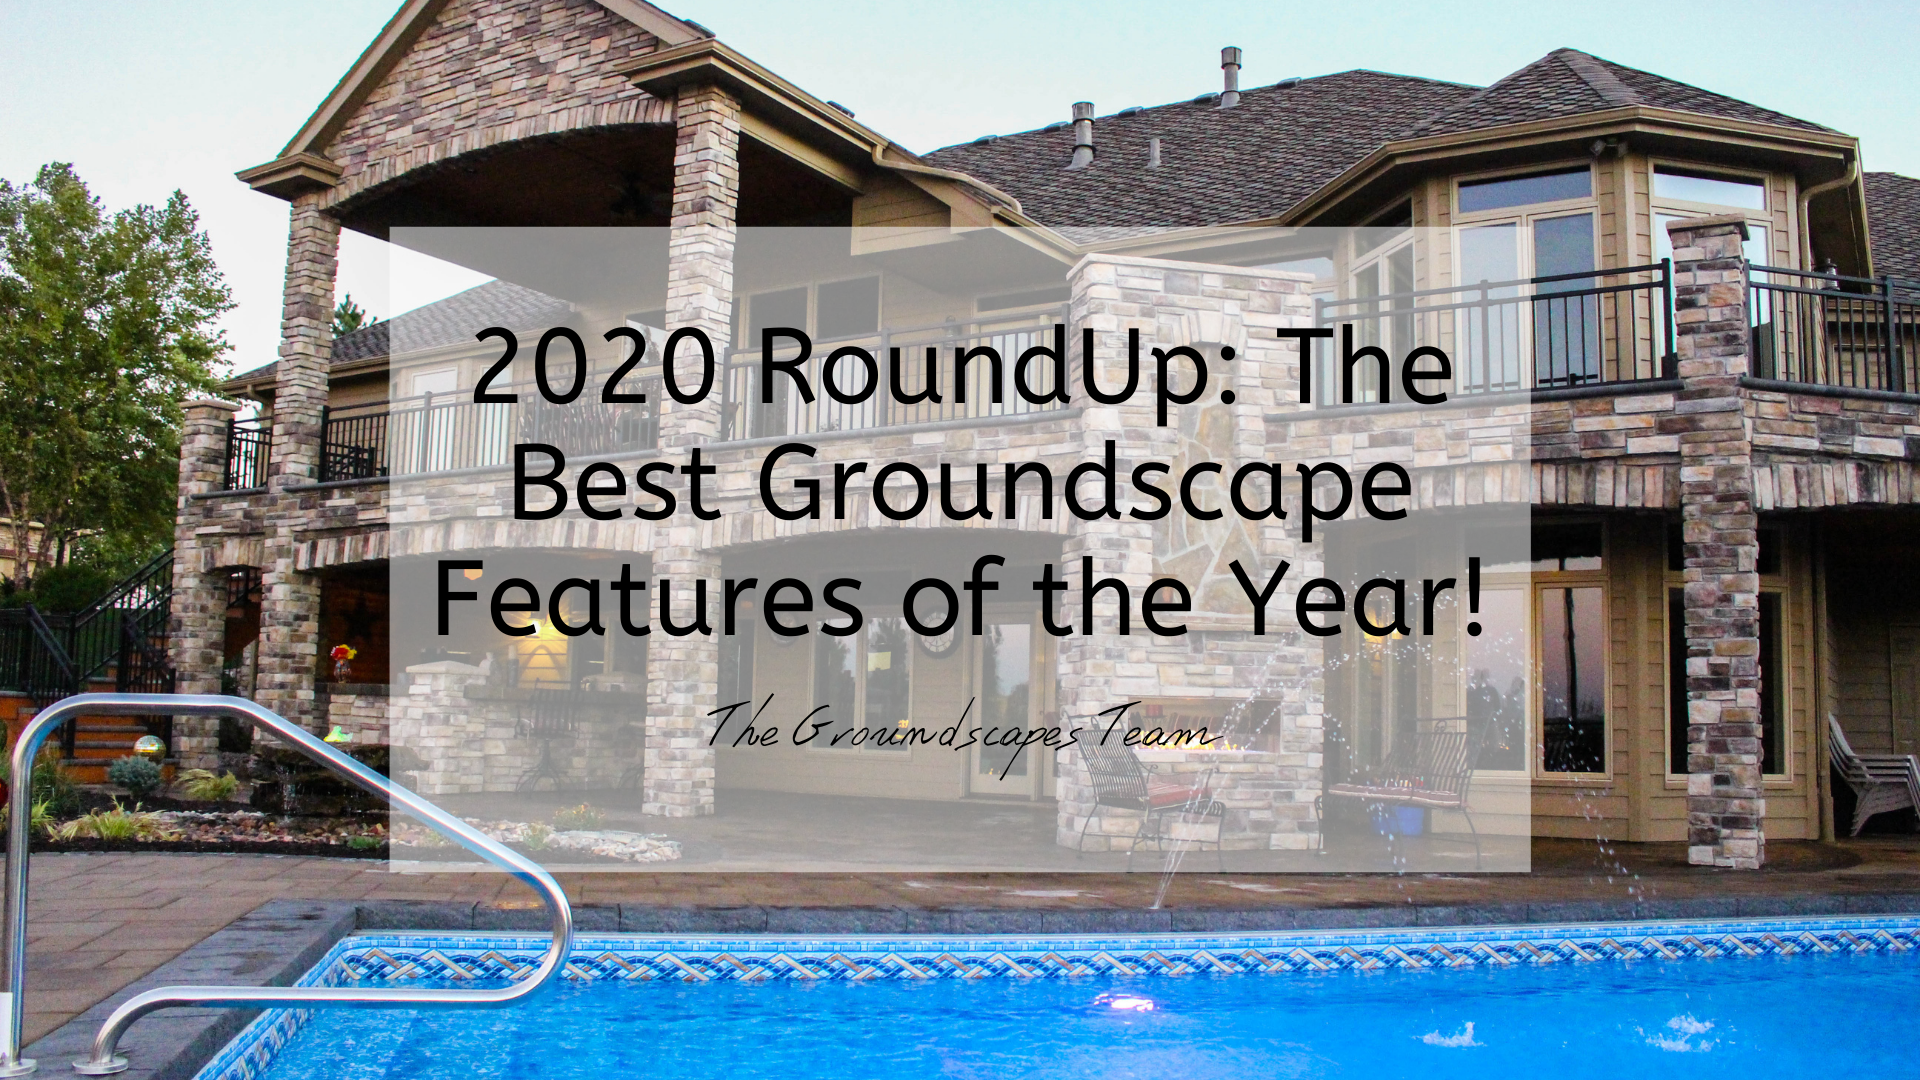 2020 RoundUp: The Best Groundscape Features of the Year!